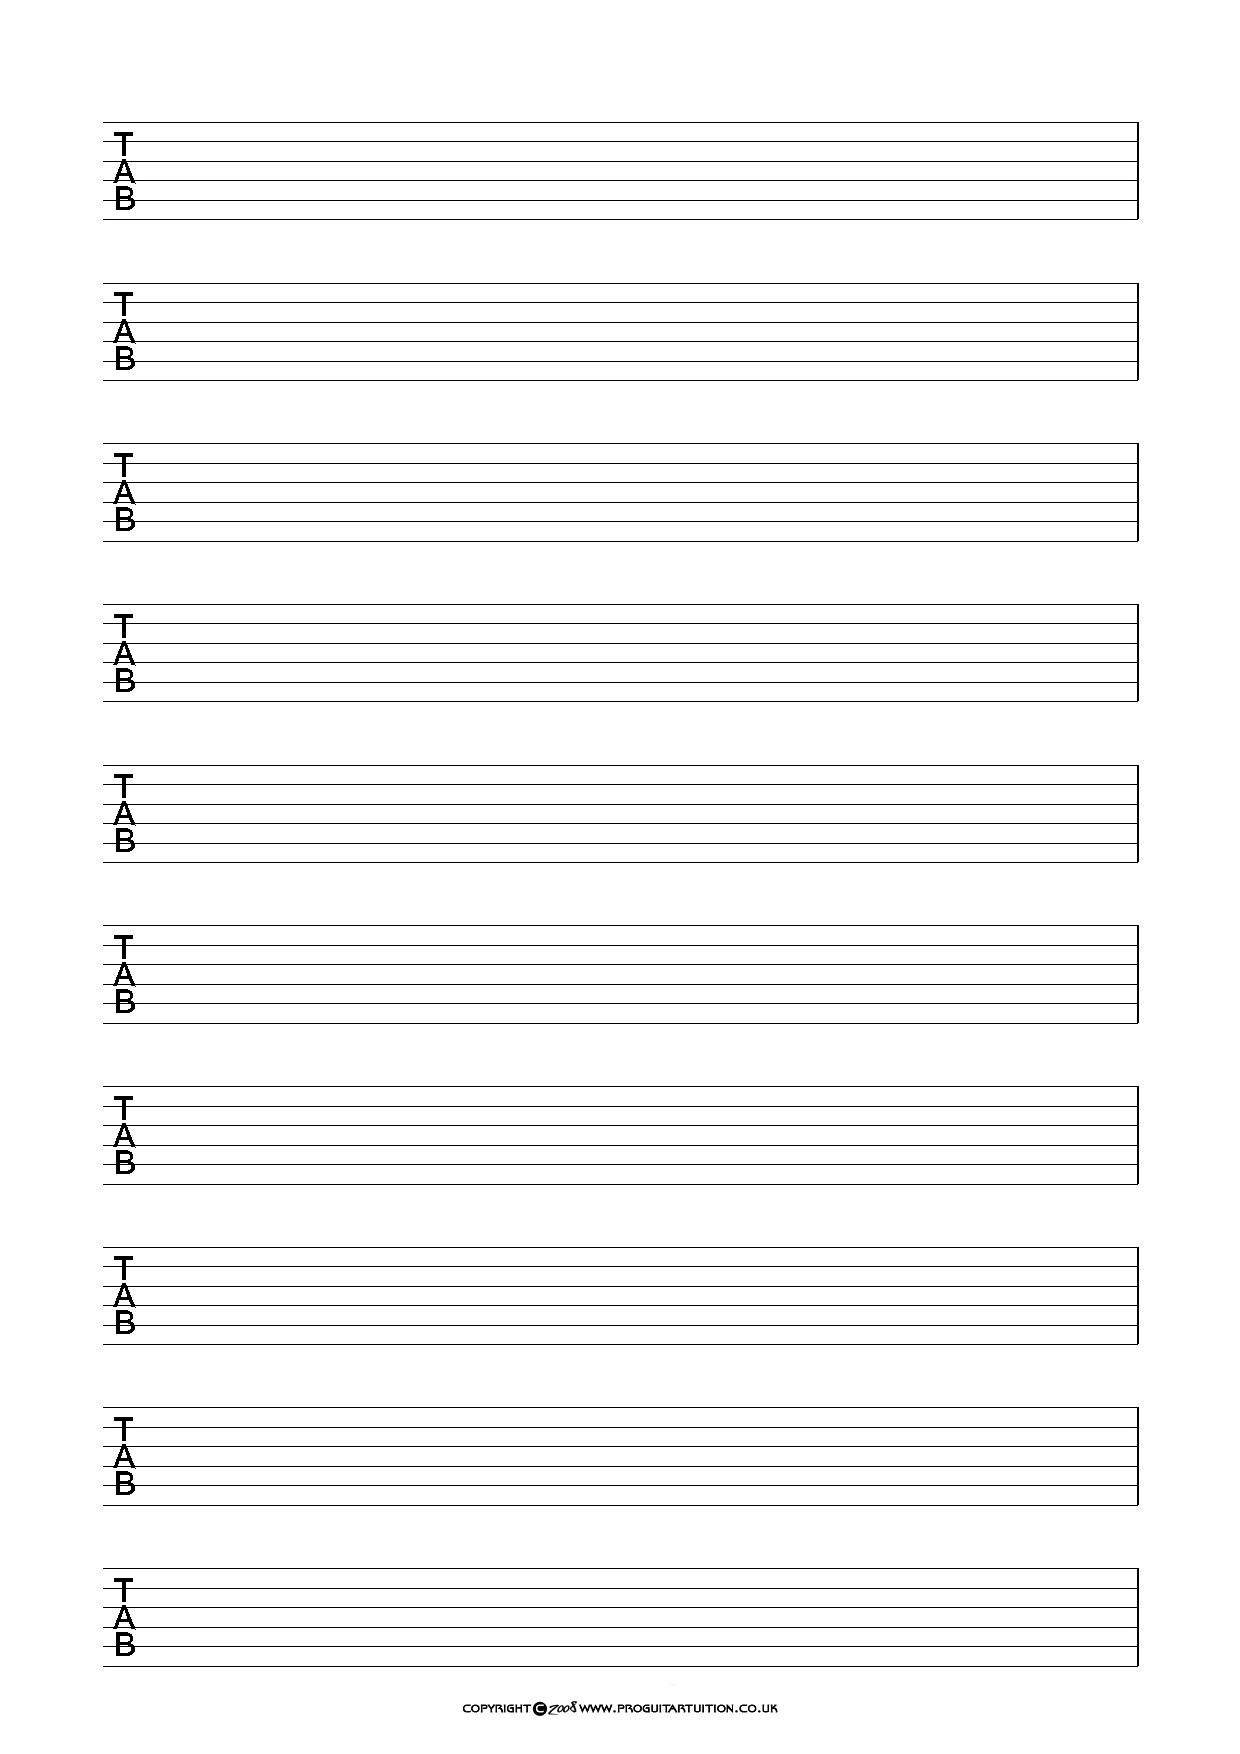 Tablature Template. Synaptic Studios A Blank Chord Template You Can - Free Printable Guitar Tablature Paper